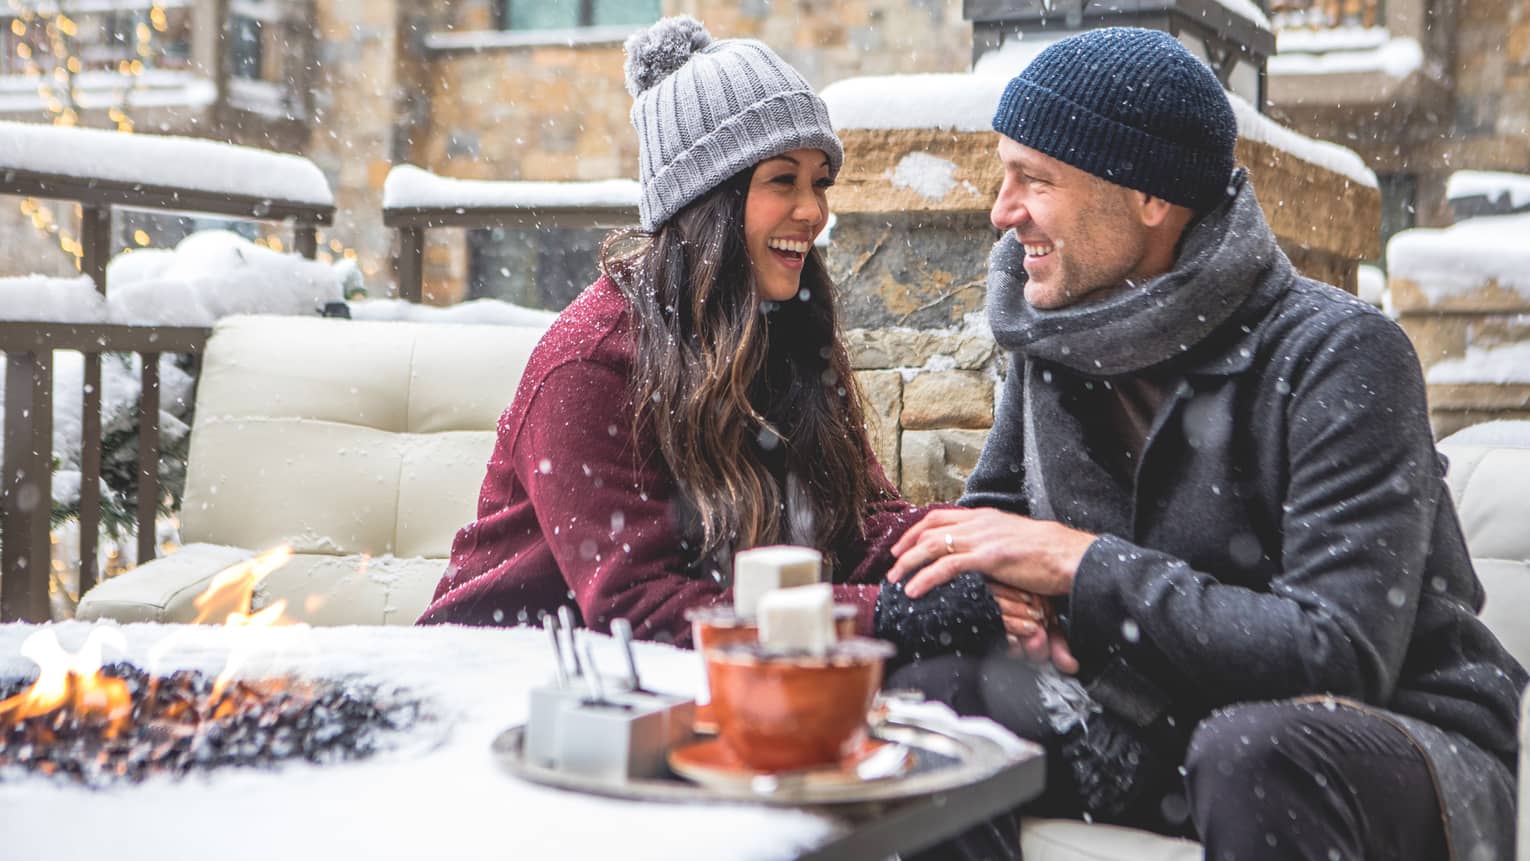 Smiling couple wearing winter clothes sit by hot chocolate tray, modern bonfire fireplace